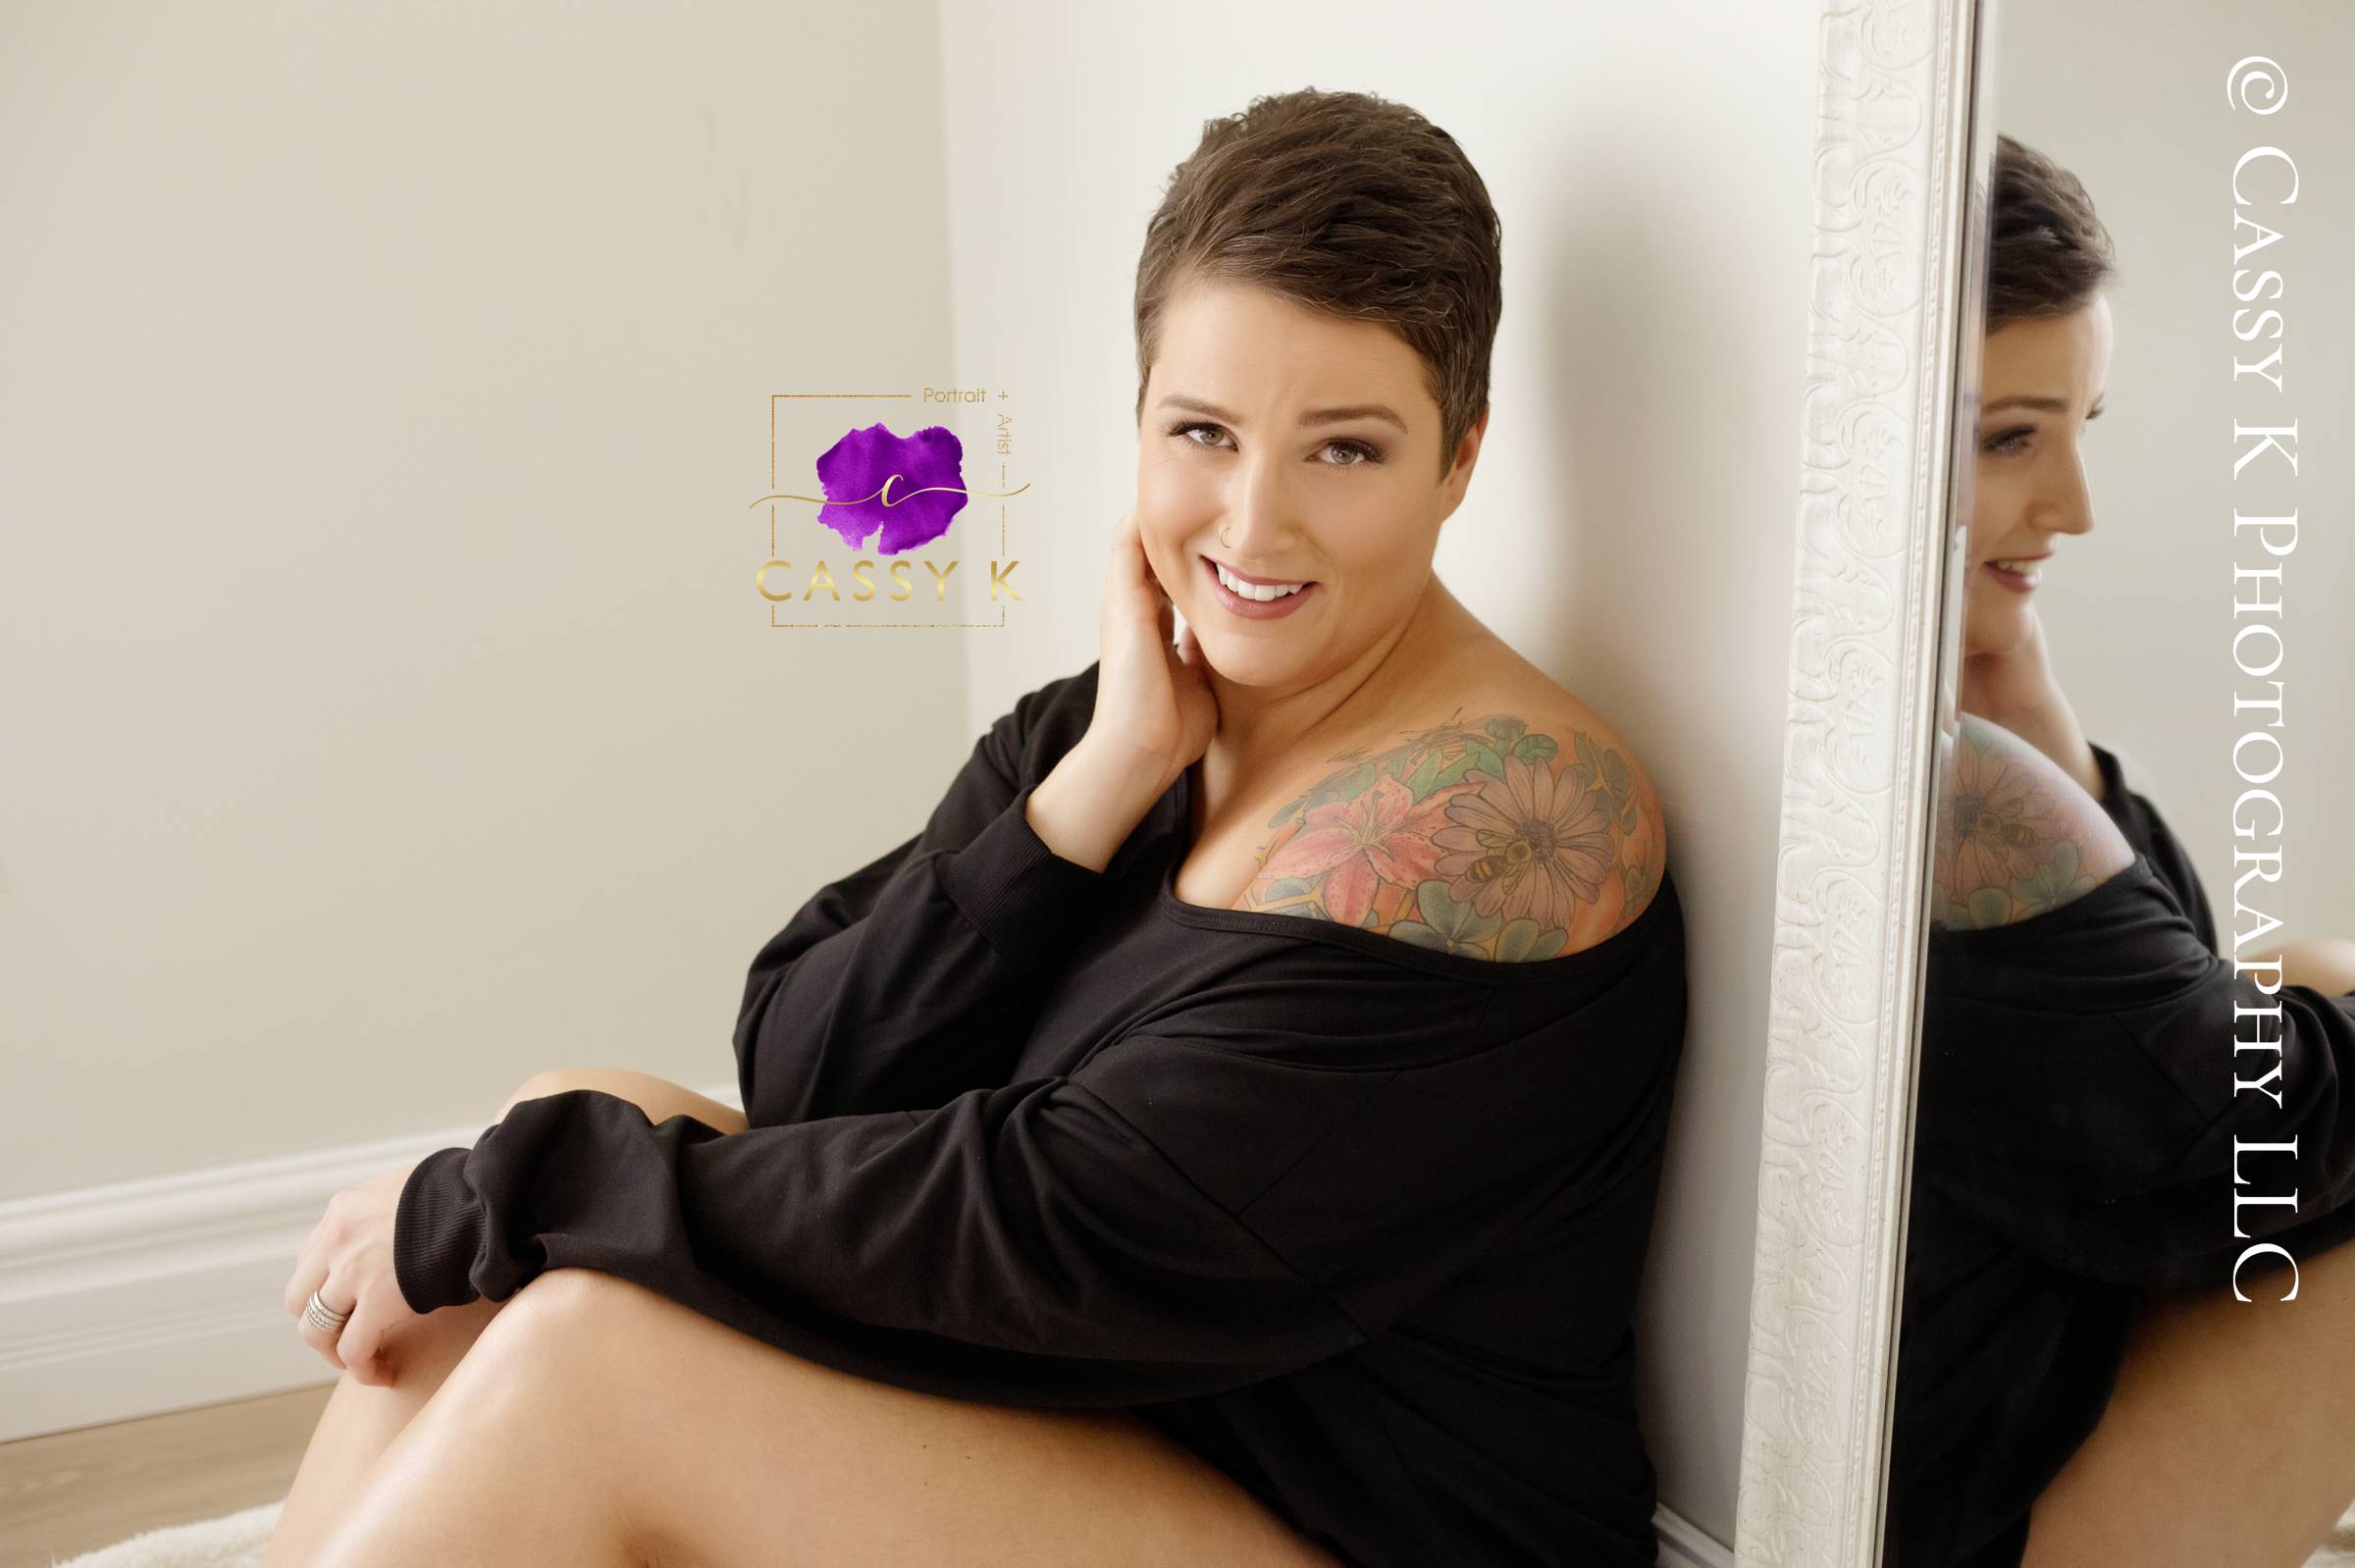 Brunette, blue eyed woman gains confidence boost during sweater Boudoir Photoshoot